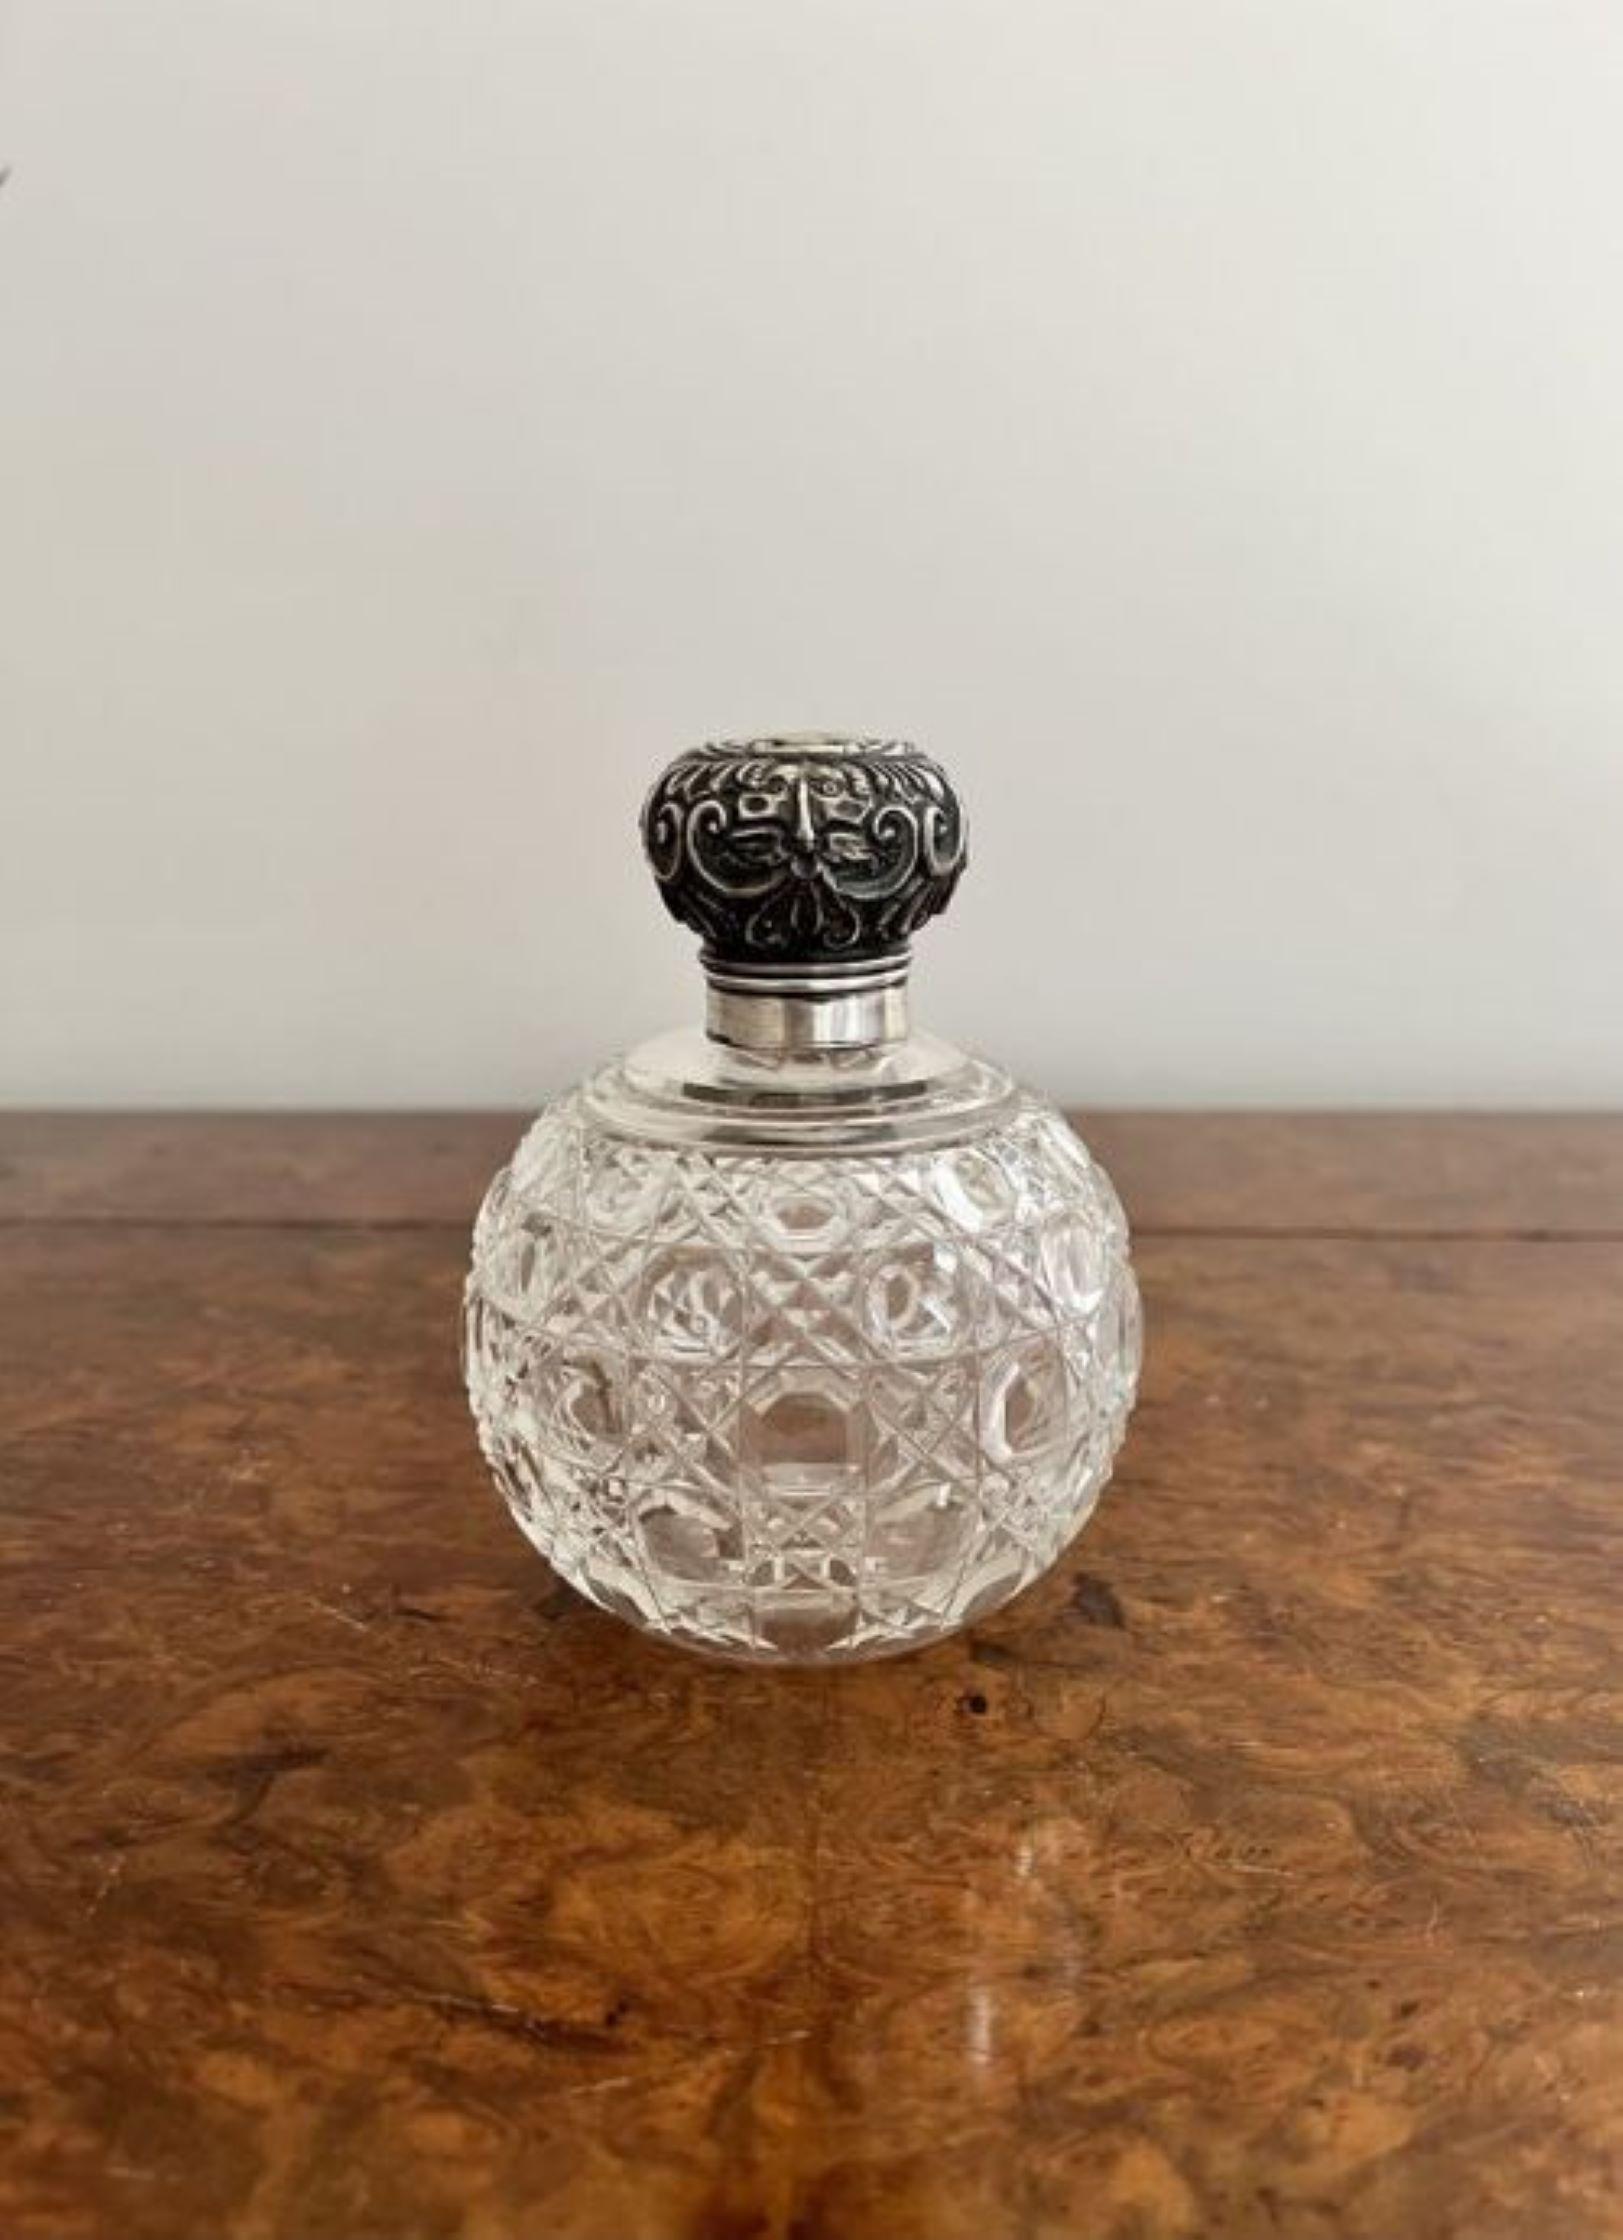 Quality antique Victorian Silver mounted scent bottle having a quality antique Victorian silver mounted scent bottle with a cut glass circular body and an ornate silver top.